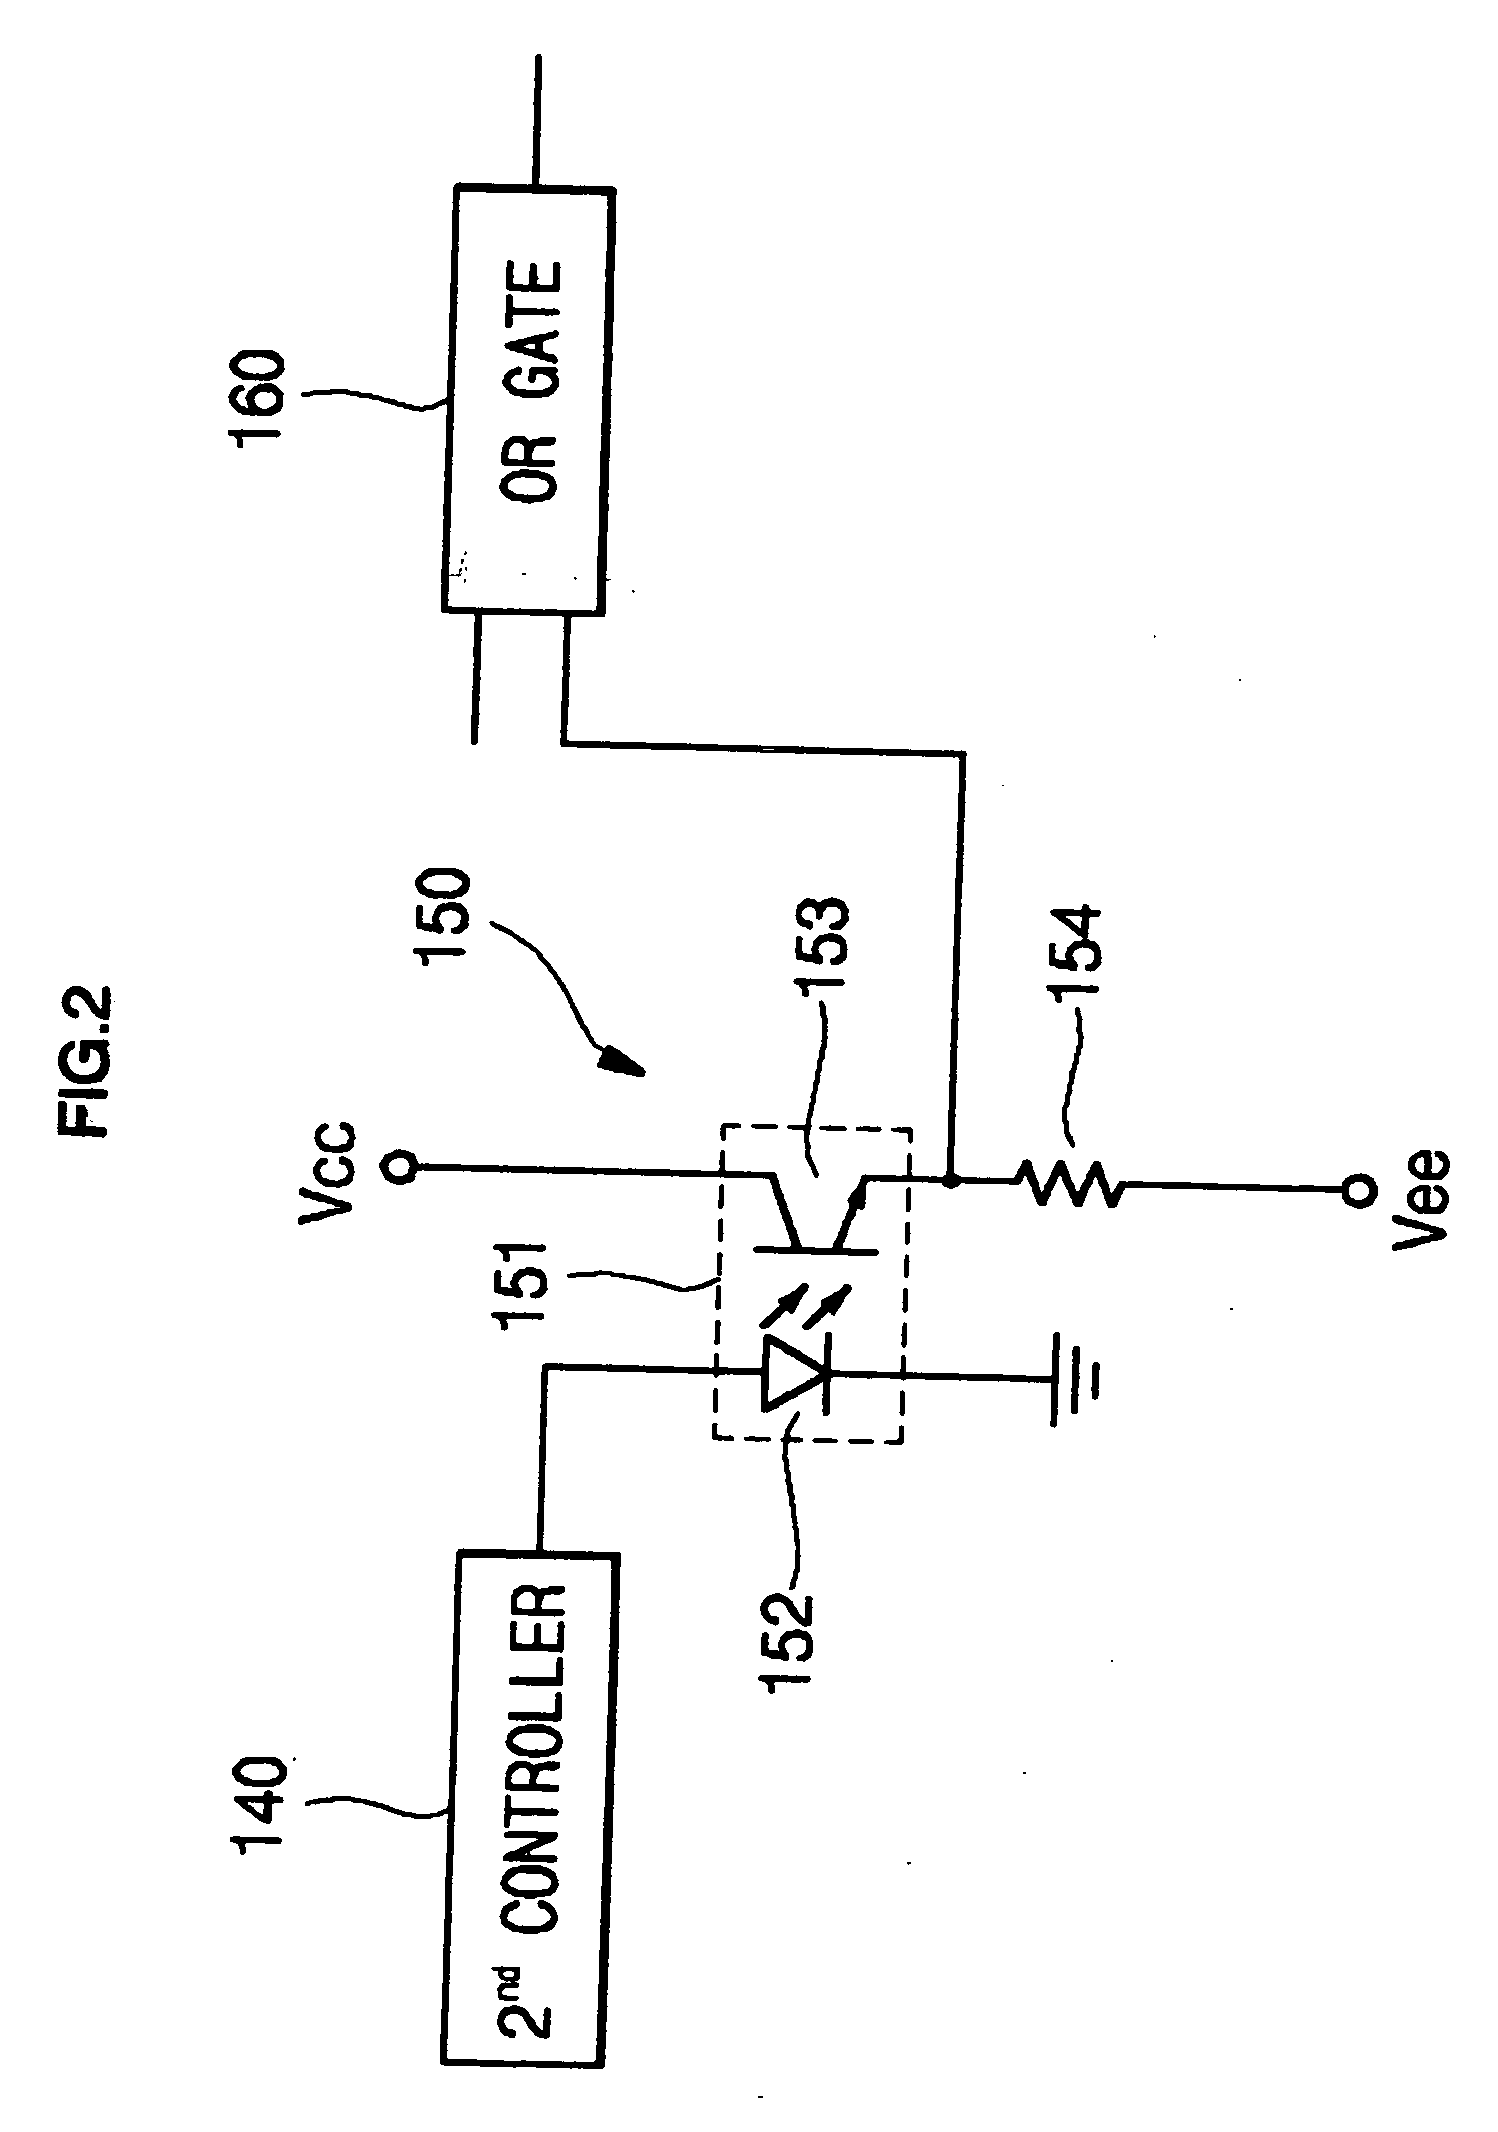 Protective circuit for a secondary battery pack and method of operating the same